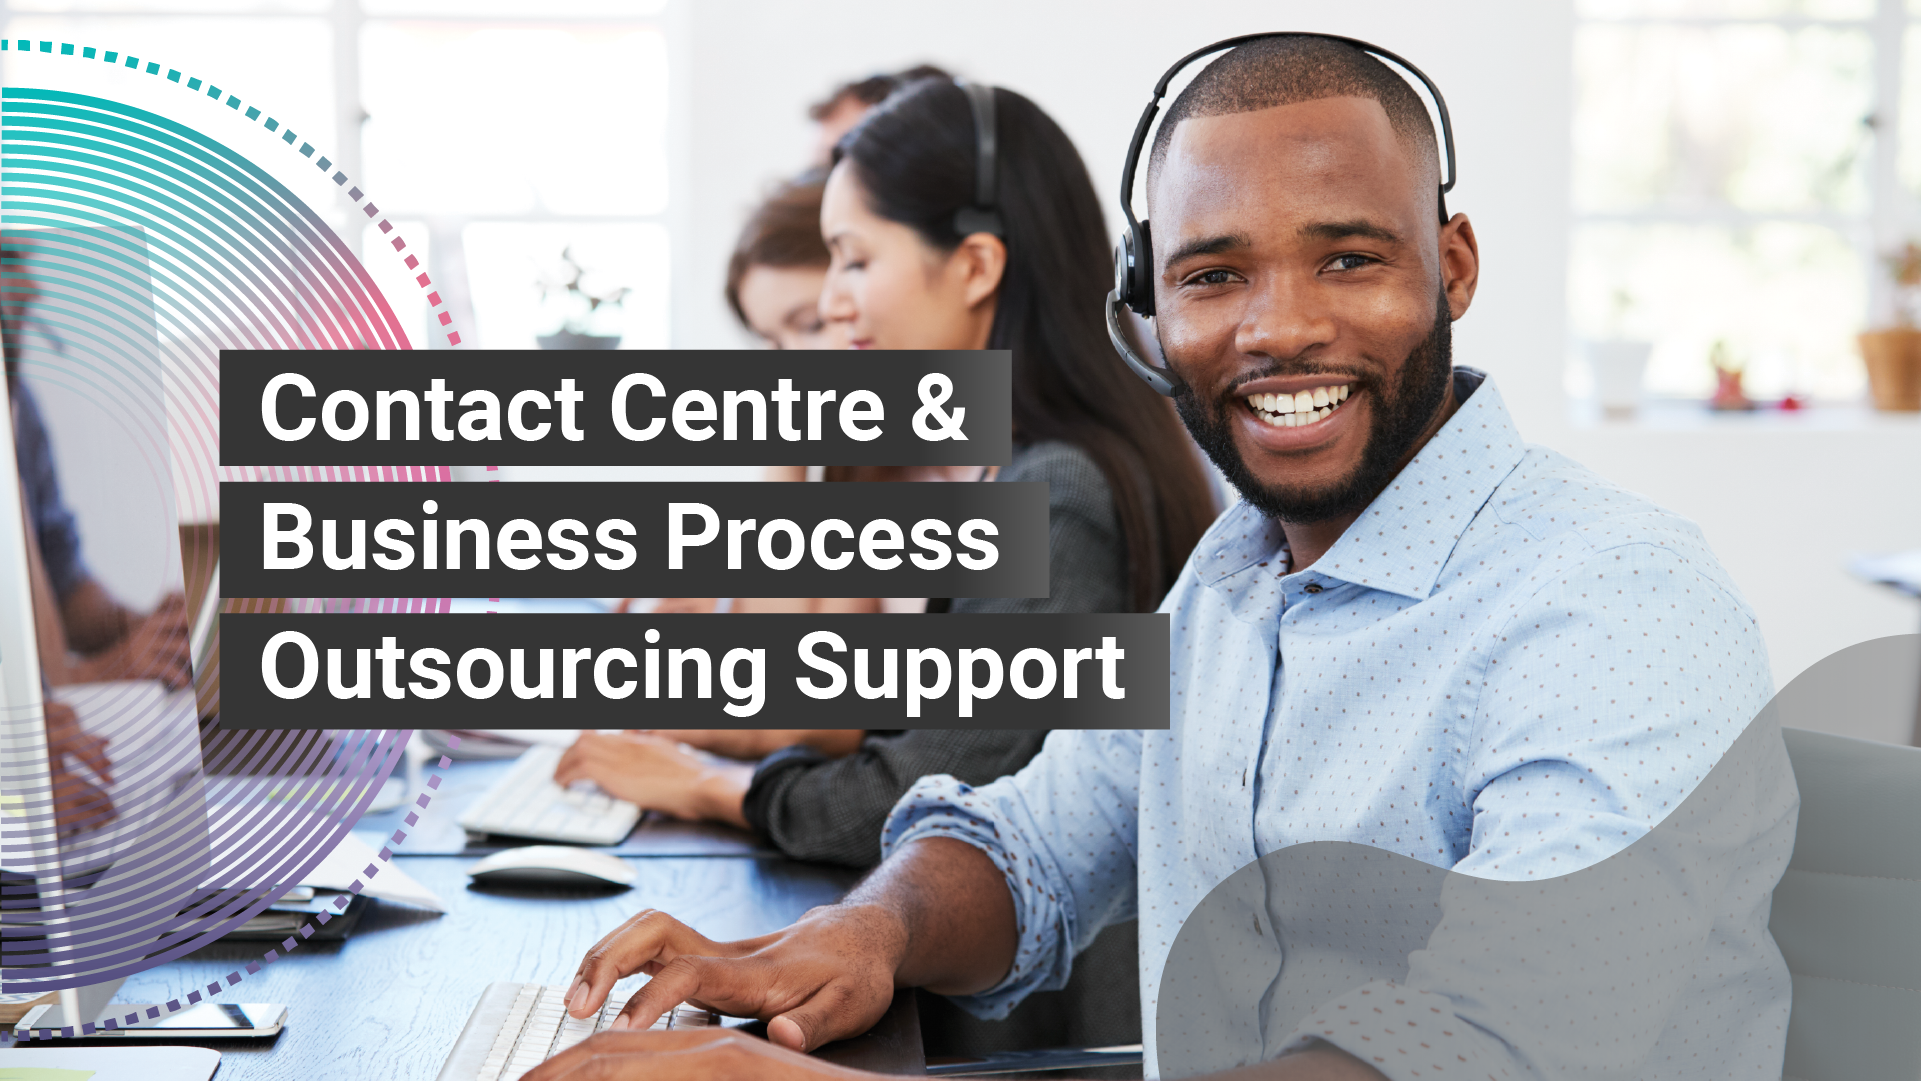 https://omnistackconnect.omnihrc.com/product/contact-center-business-process-outsourcing-support